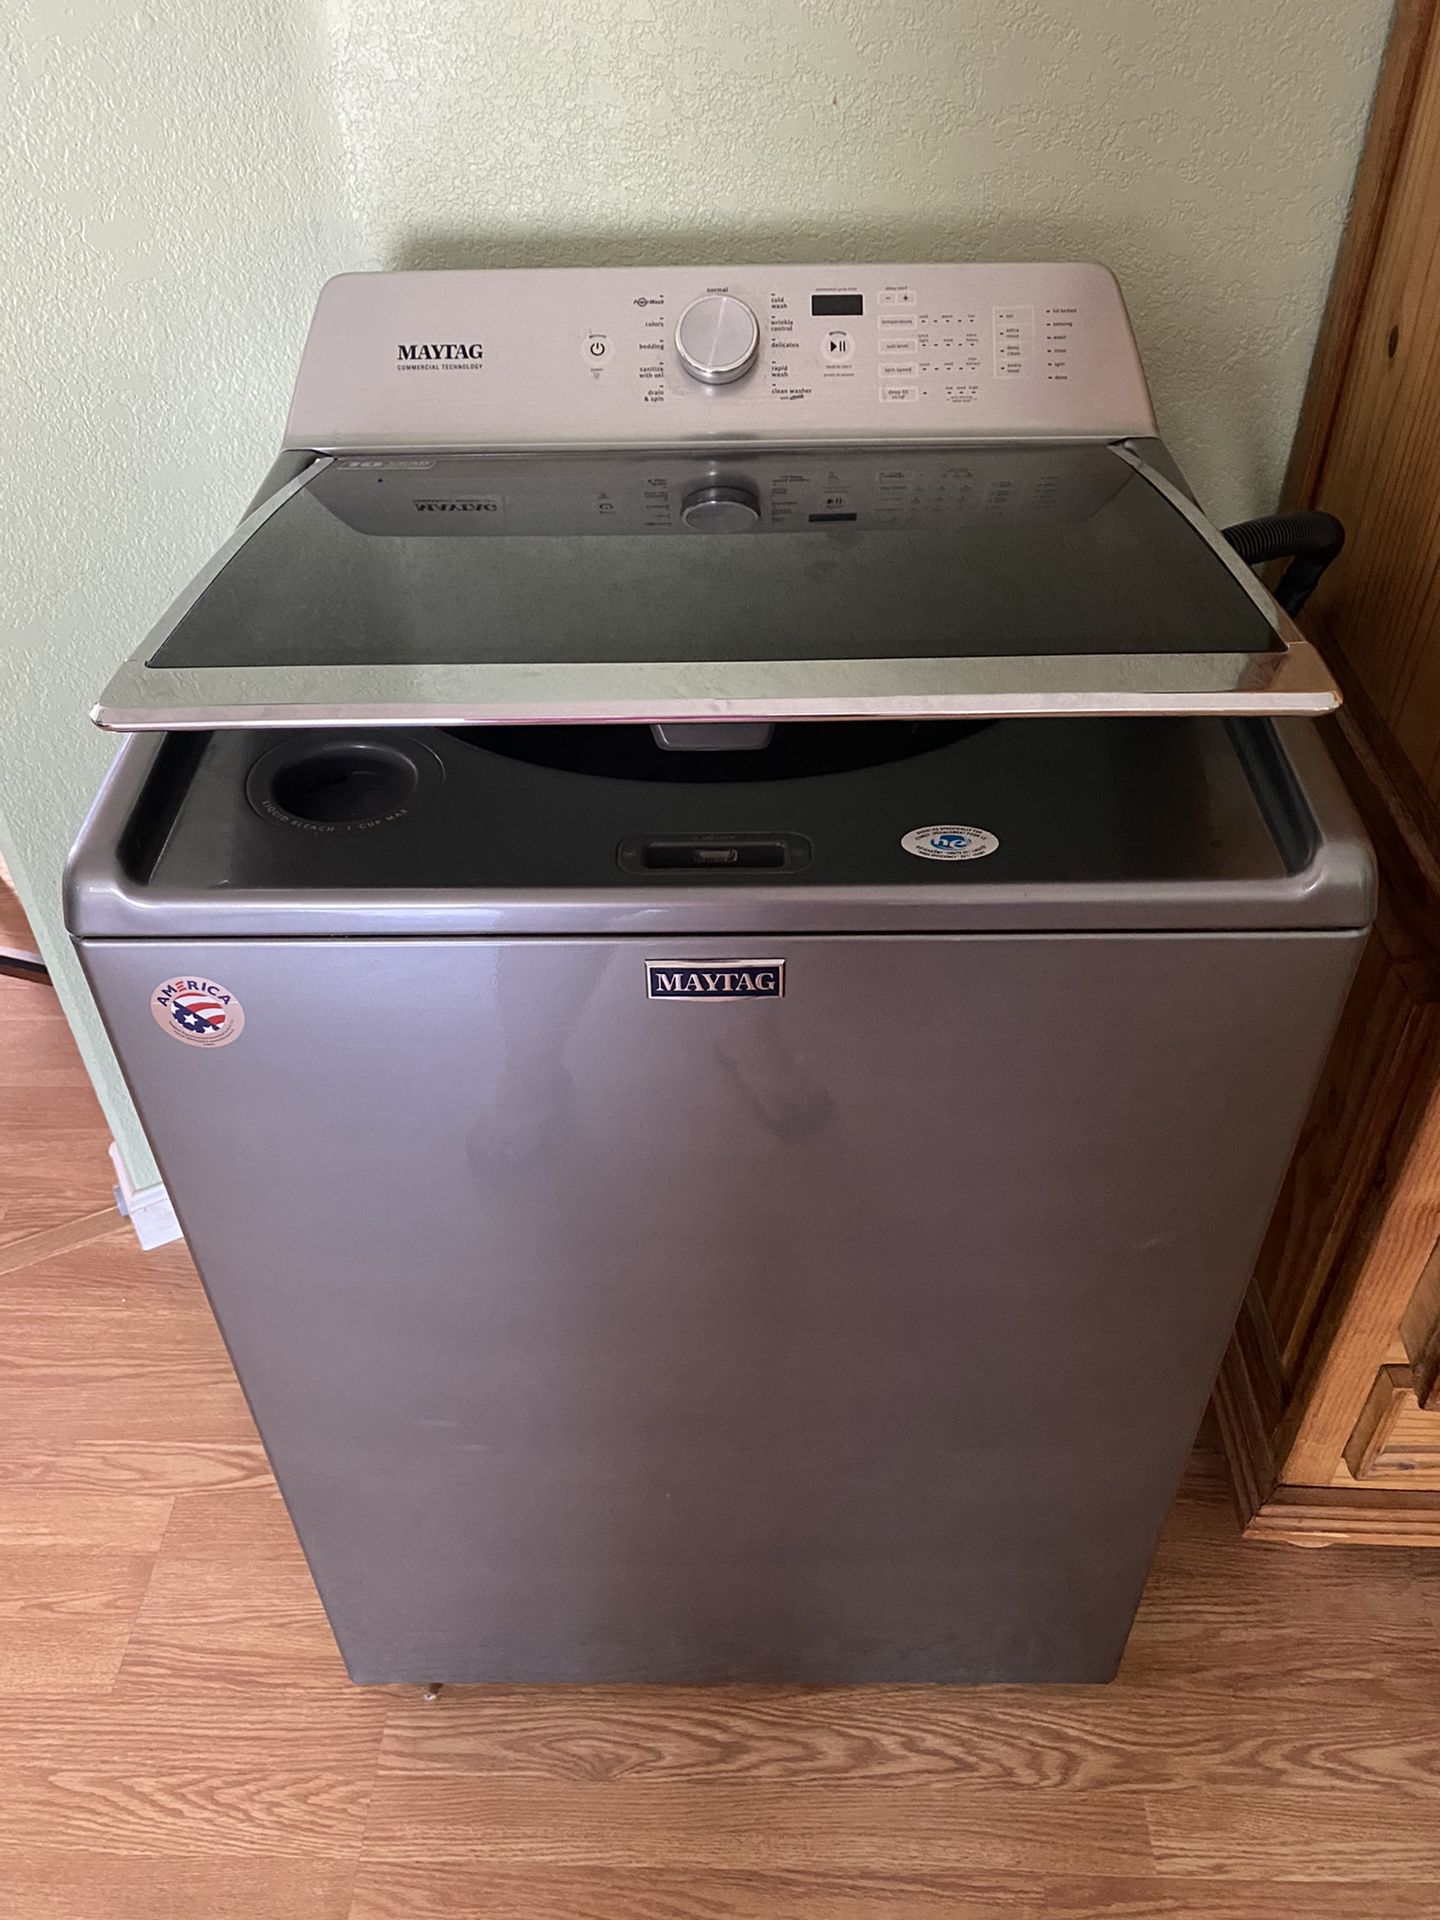 Maytag commercial washer